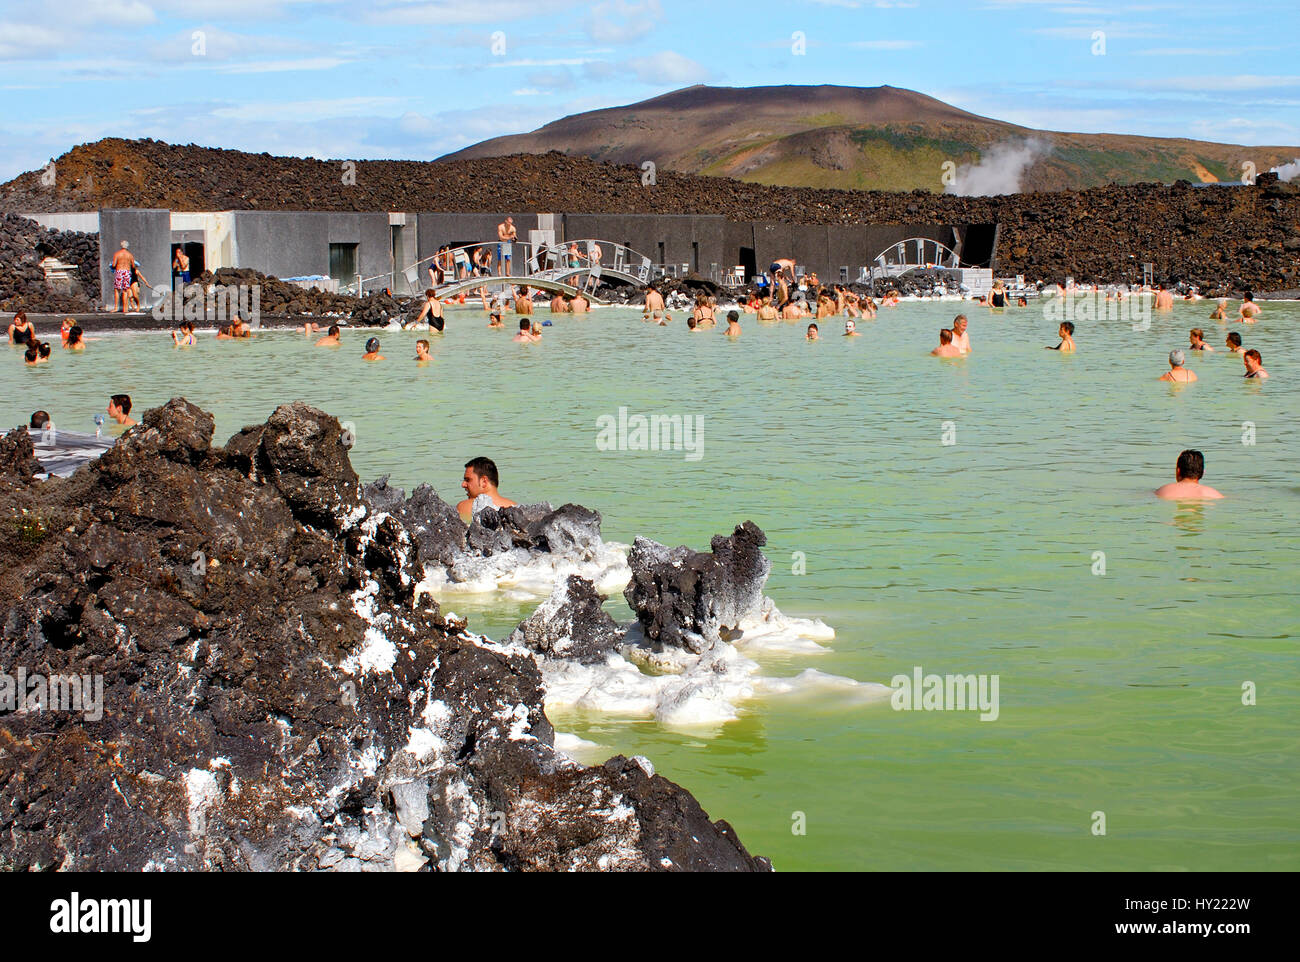 Stock Photo of locals and tourists enjoying  the public swimming pool at the Blue Lagoon in Iceland. Stock Photo